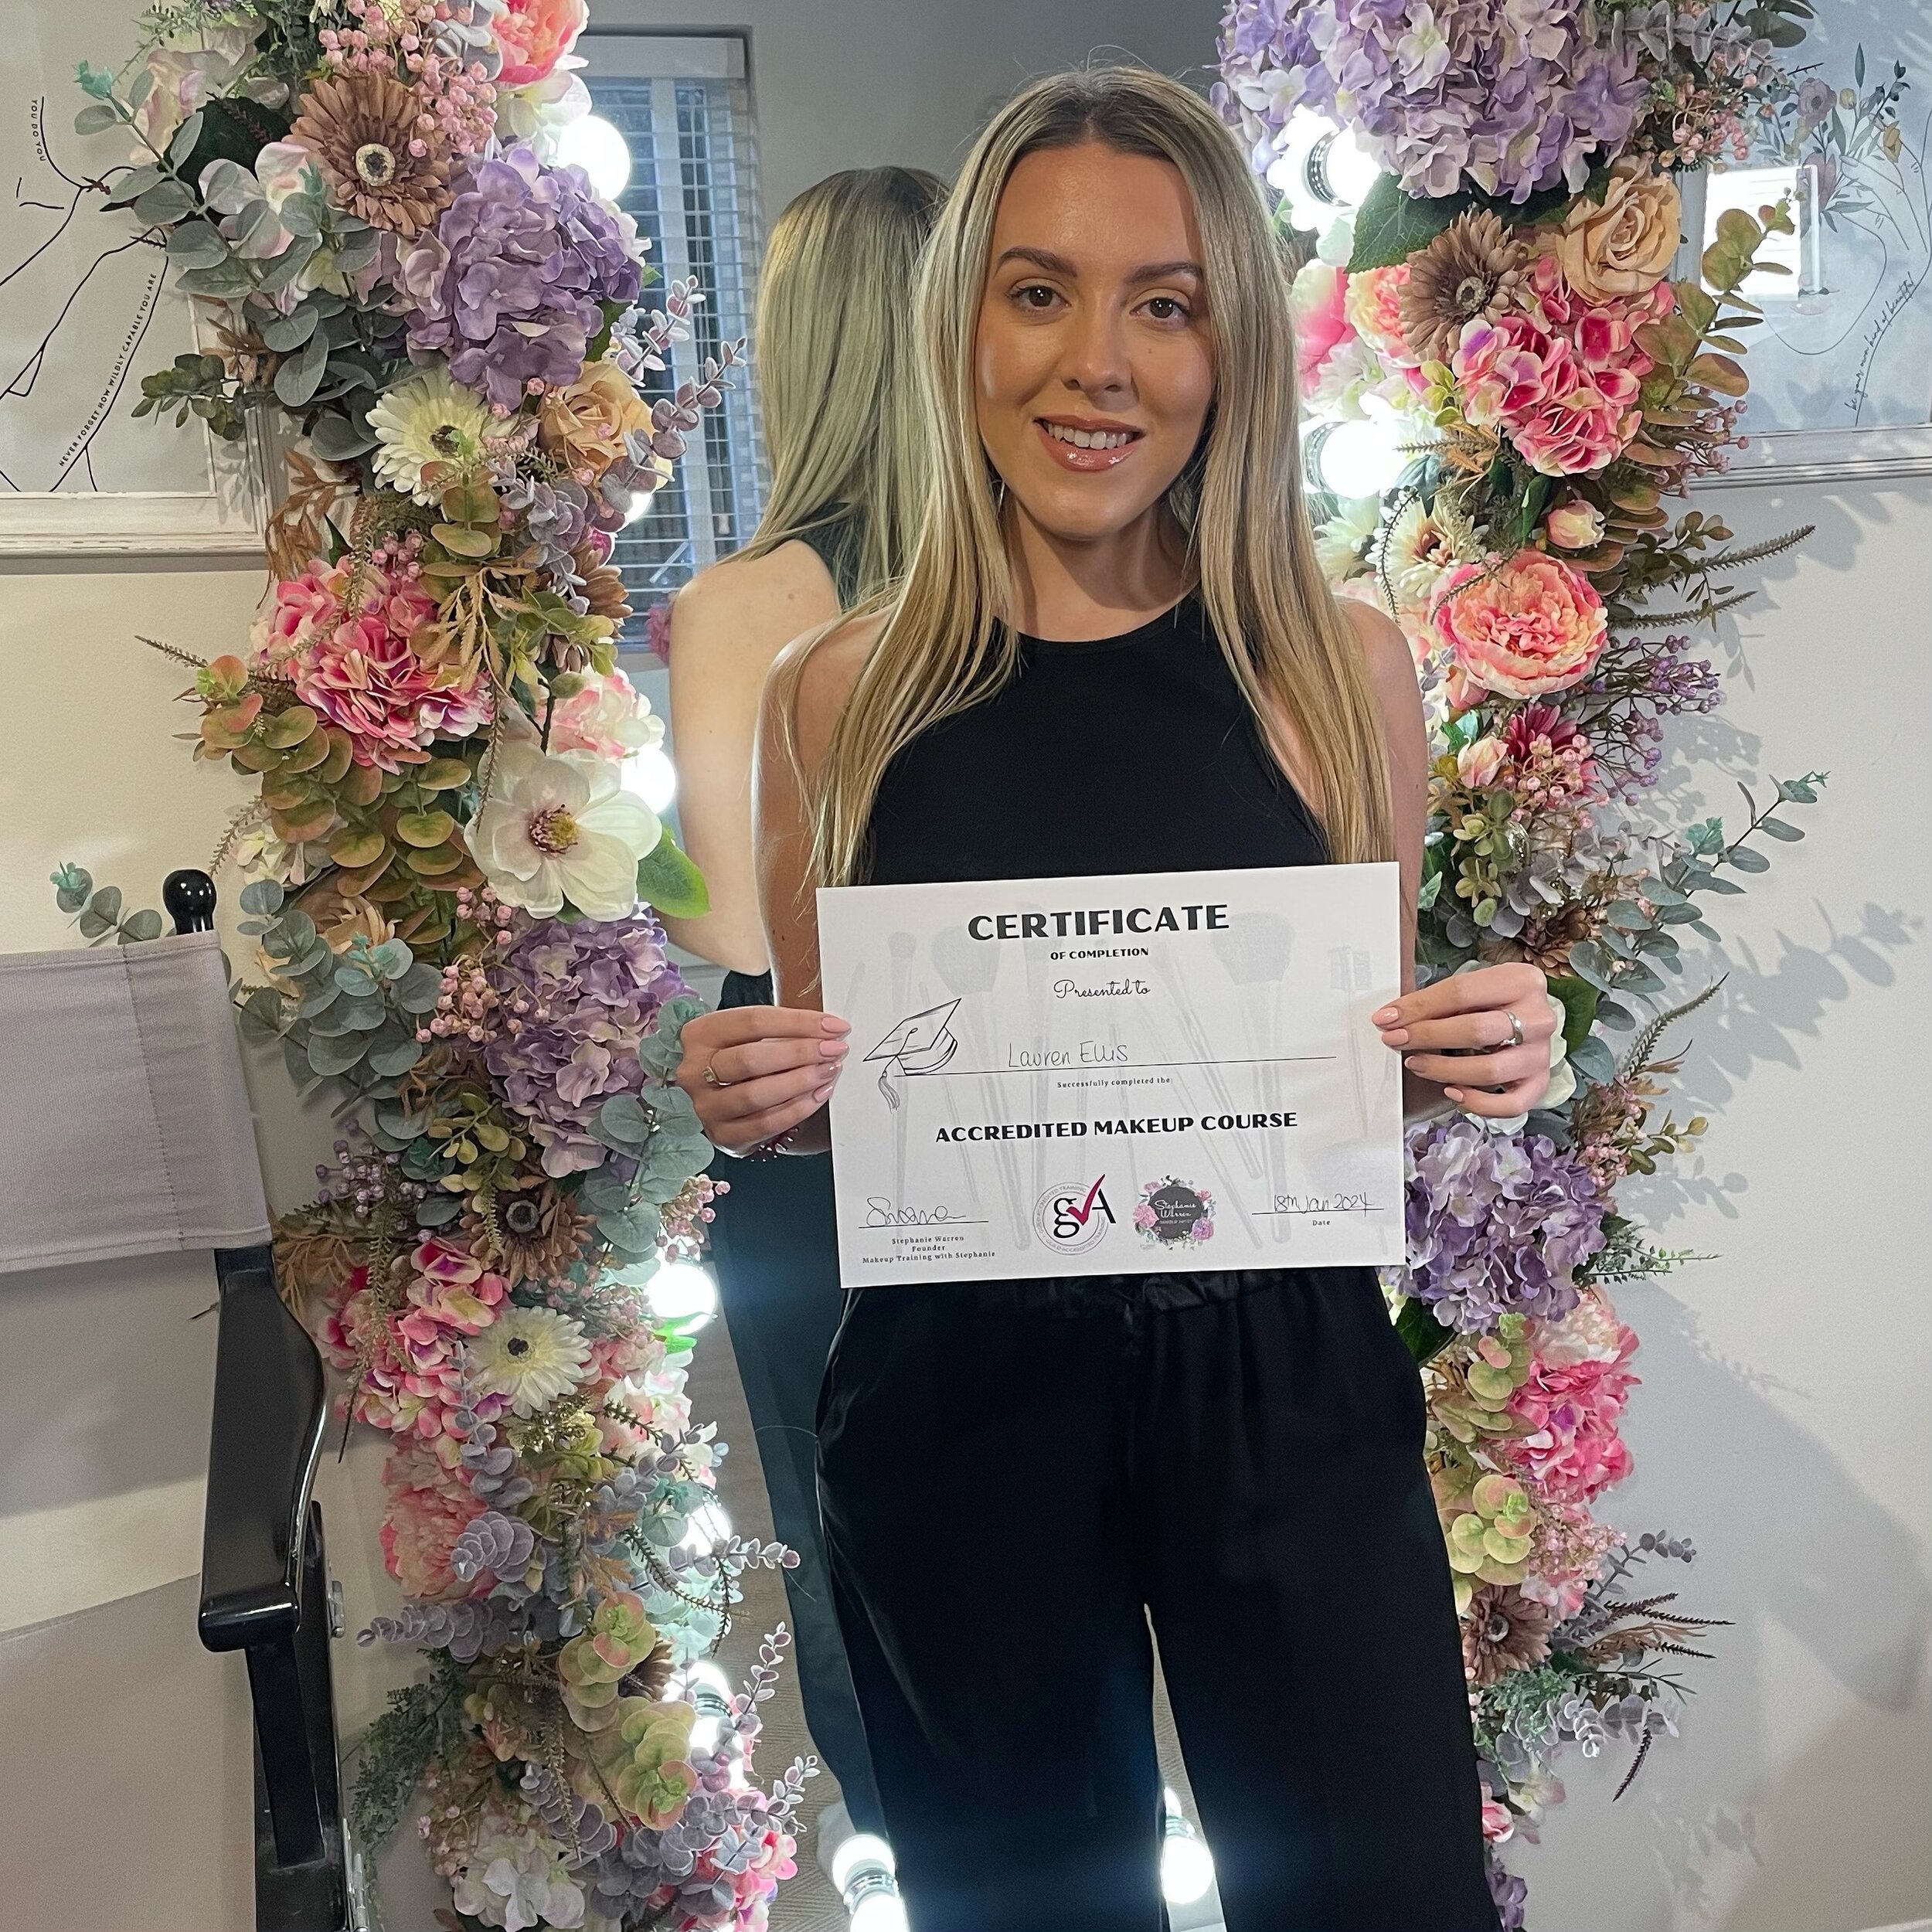 ✨ Accredited Makeup Course ✨ 

A massive congratulations to Lauren who completed her accredited makeup course with me 💜✨👏

MUA: @makeupbylaurenfaye 

#makeupcourse #makeuptraining #onetoonemakeuptraining #onetoonemakeuplesson #makeupcoursesurrey #m